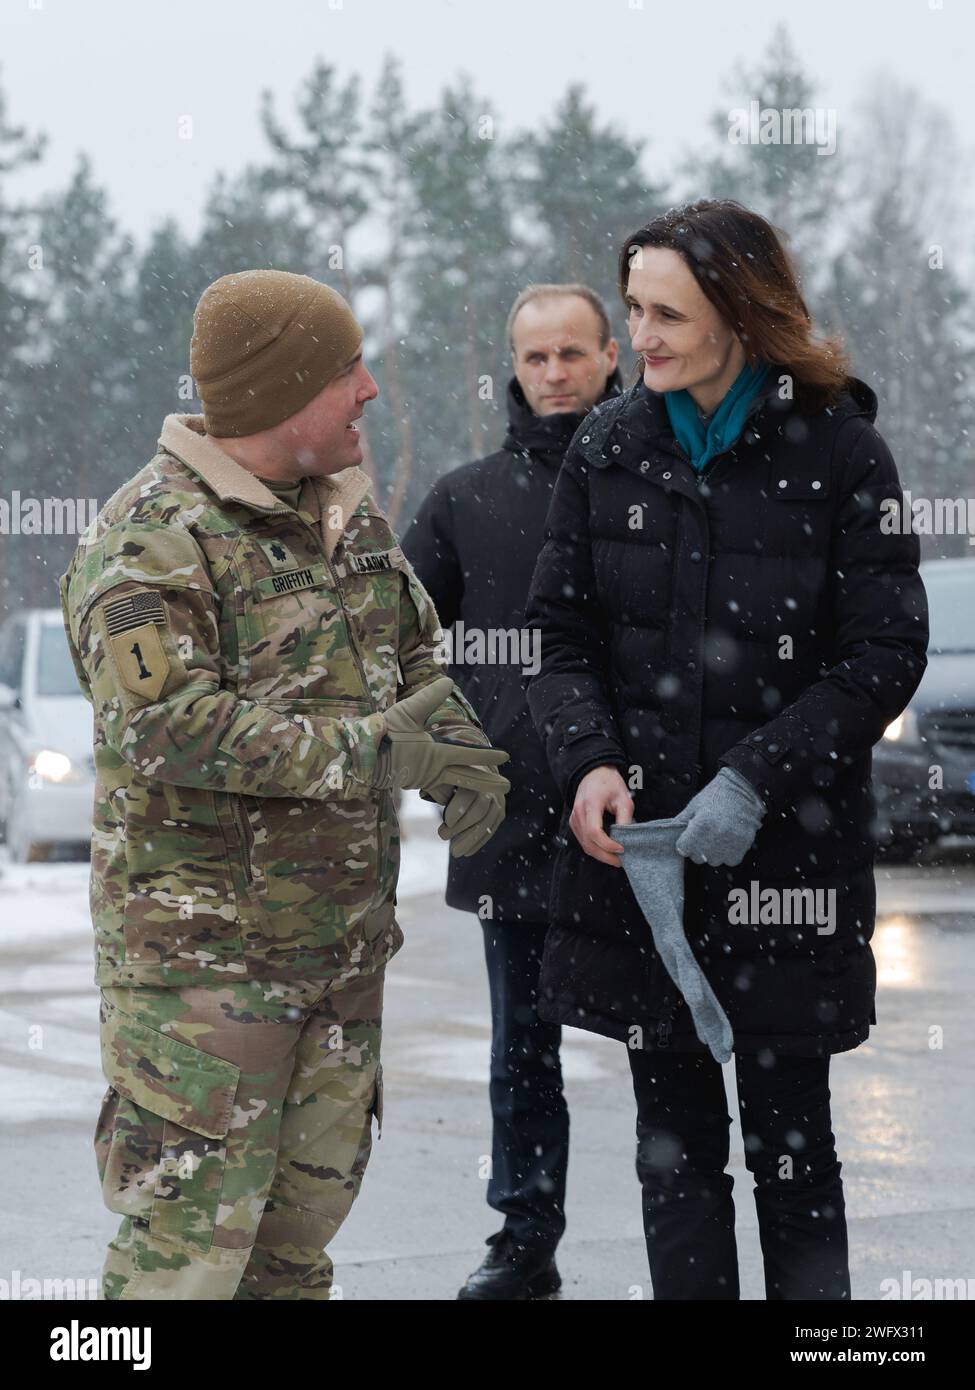 U.S. Army Lt. Col. David Griffith, the commander of 3rd Battalion, 67th Armored Regiment, 2nd Armored Brigade Combat Team, 3rd Infantry Division, welcomes Lithuanian Speaker of Parliament Viktorija Čmilytė-Nielsen during a tour of Camp Herkus, Lithuania, Jan. 4. 2024. The 3rd Infantry Division’s mission in Europe is to engage in multinational training and exercises across the continent, working alongside NATO Allies and regional security partners to provide combat-credible forces to V Corps, America’s forward deployed corps in Europe. Stock Photo